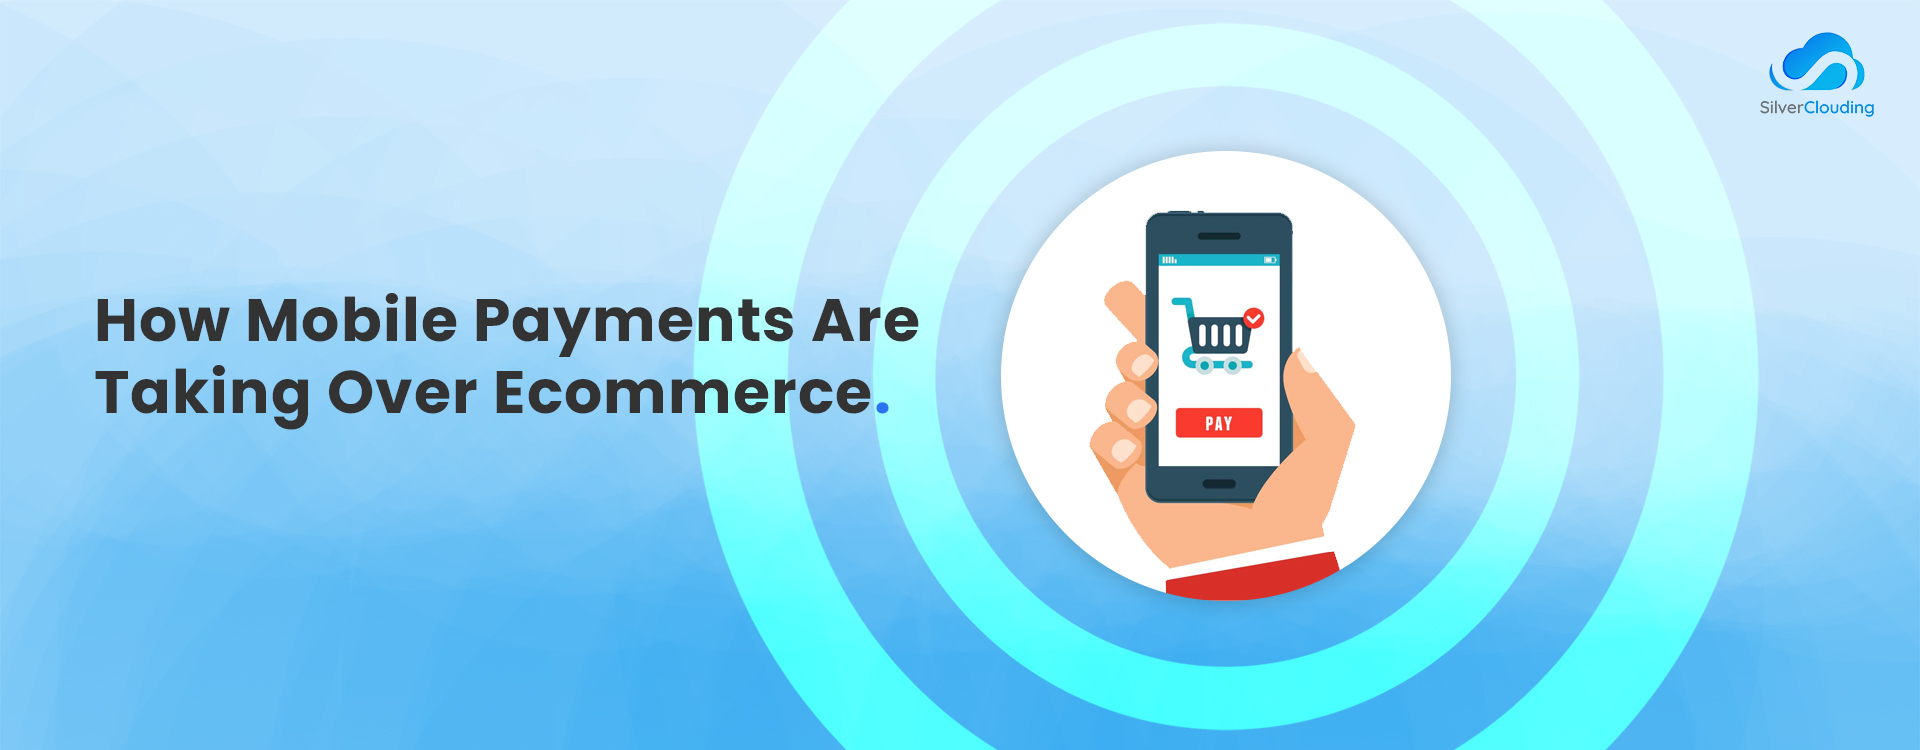 ecommerce mobile payments